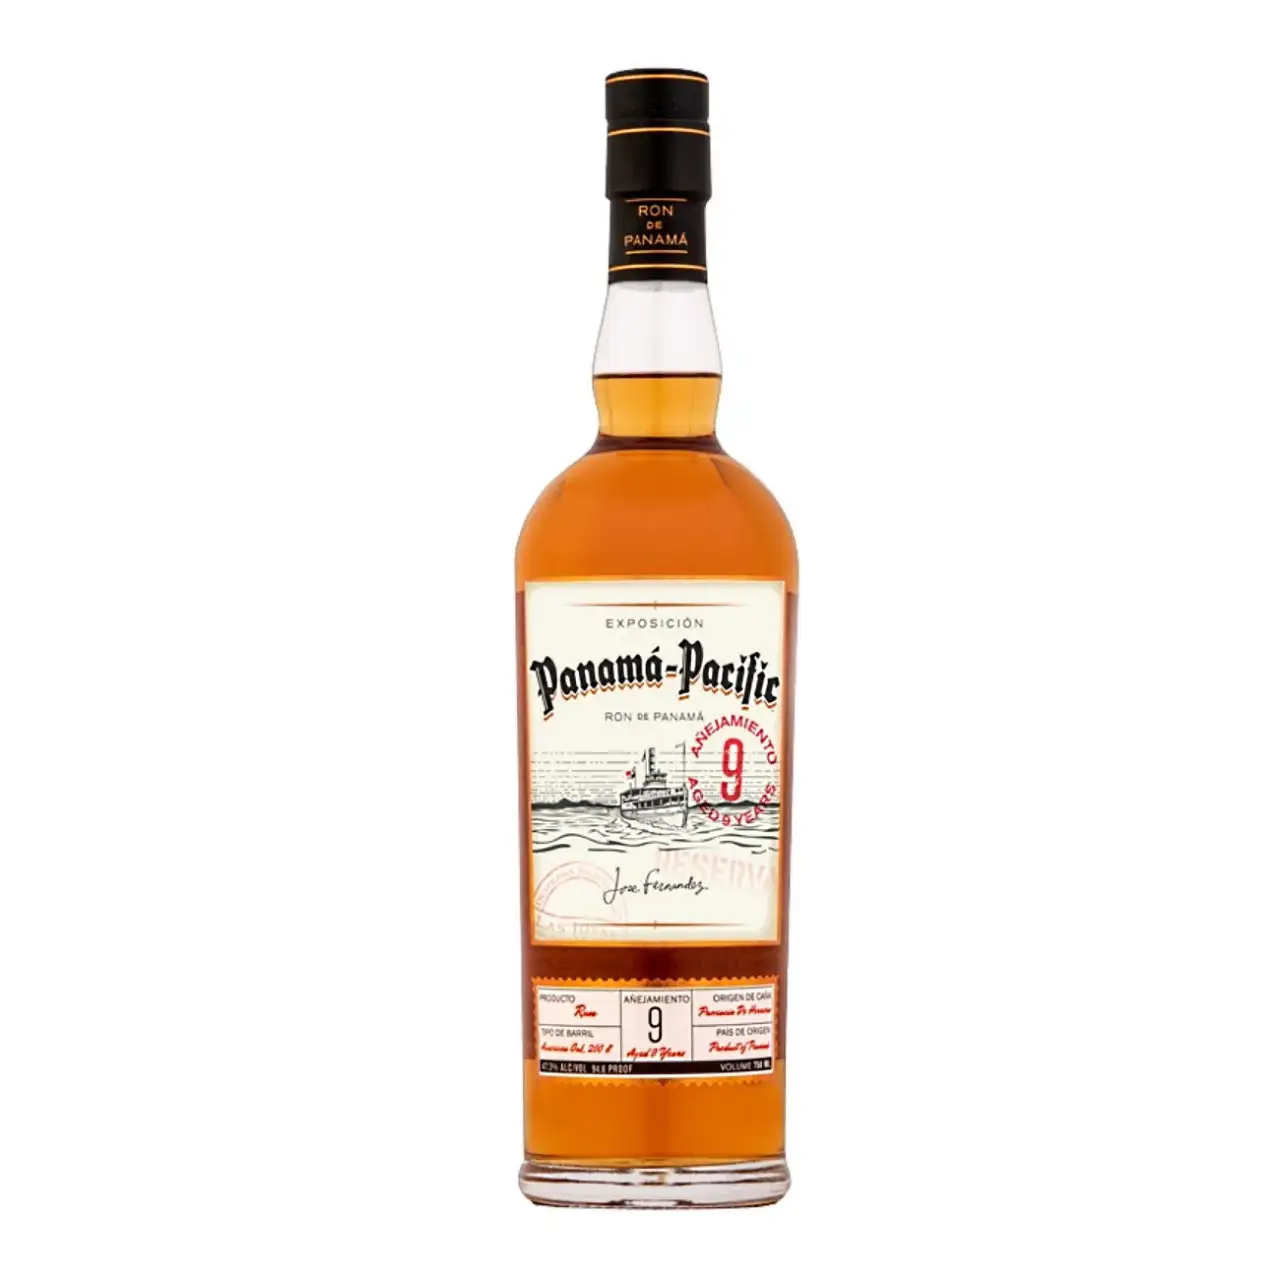 Image of the front of the bottle of the rum Panama-Pacific Aged 9 Years